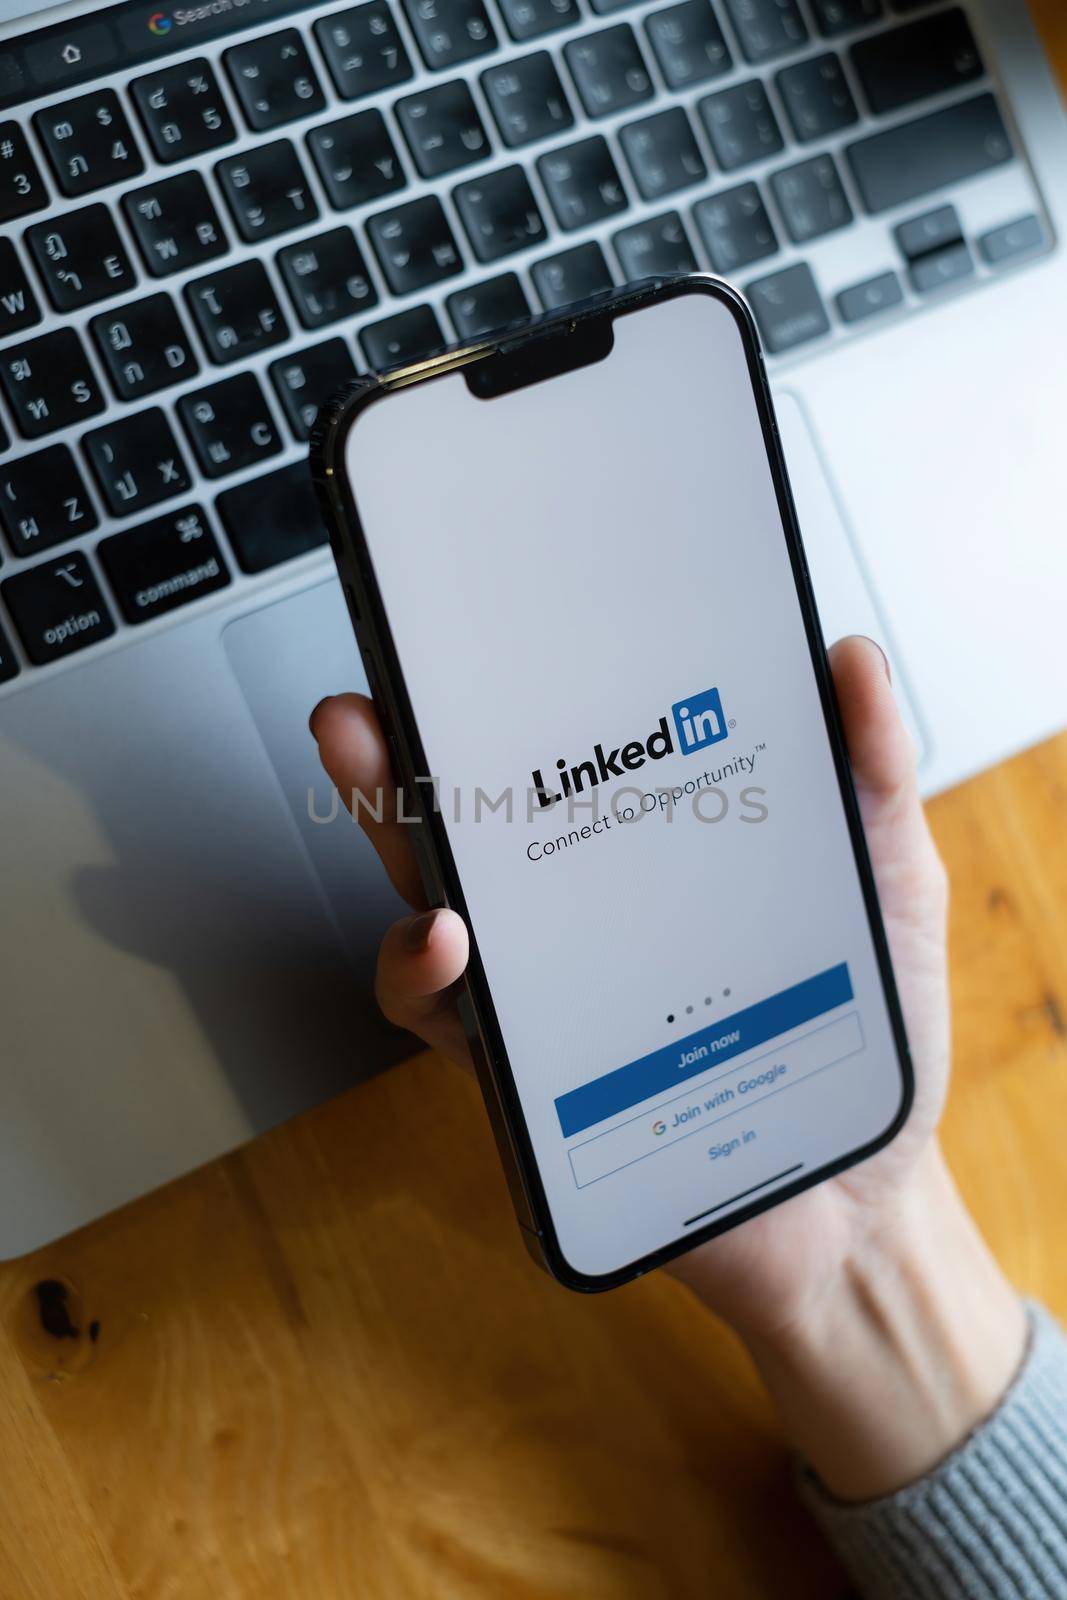 CHIANG MAI, THAILAND: OCT 18, 2021: LinkedIn logo on phone screen. LinkedIn is a social network for search and establishment of business contacts. It is founded in 2002. by itchaznong